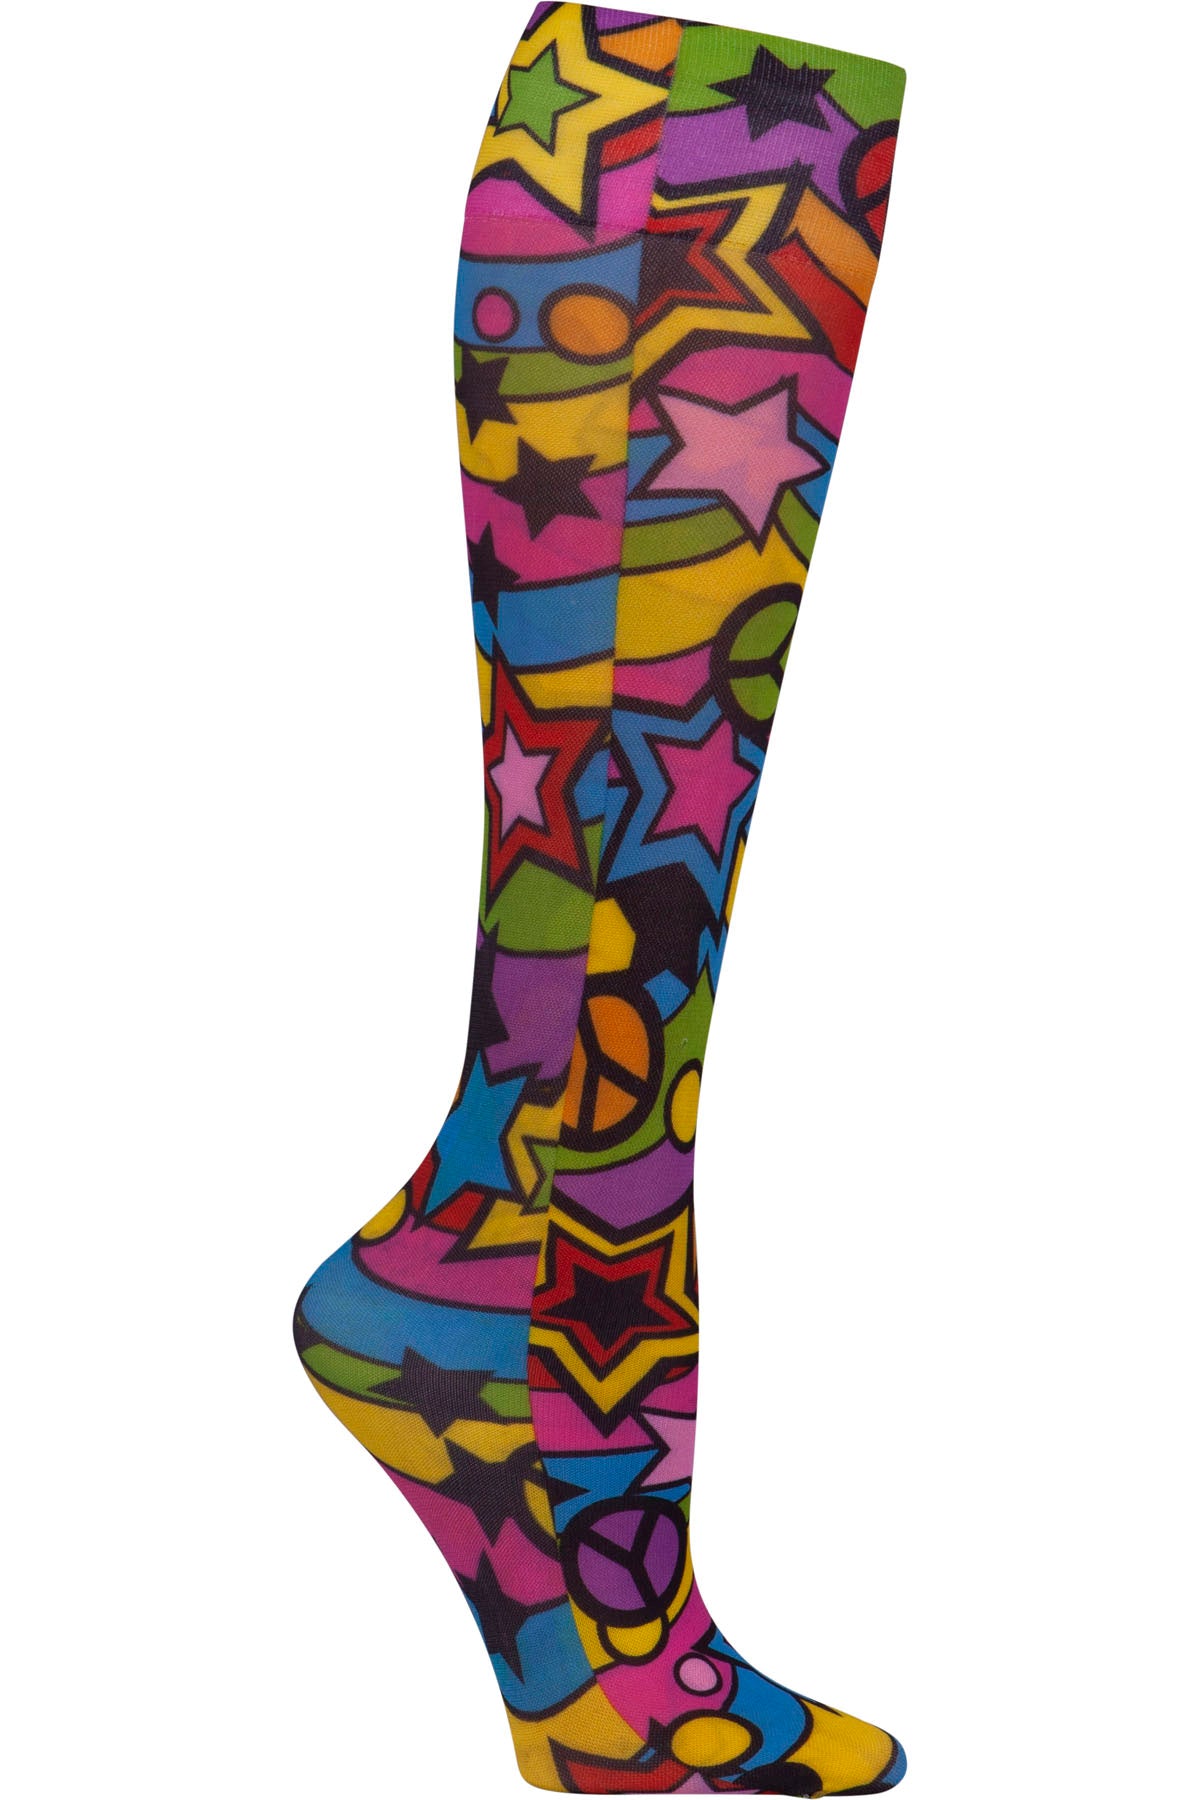 Celeste Stein Mild Compression Socks 8-15 mmHG Rainbow Mountains at Parker's Clothing and Shoes.